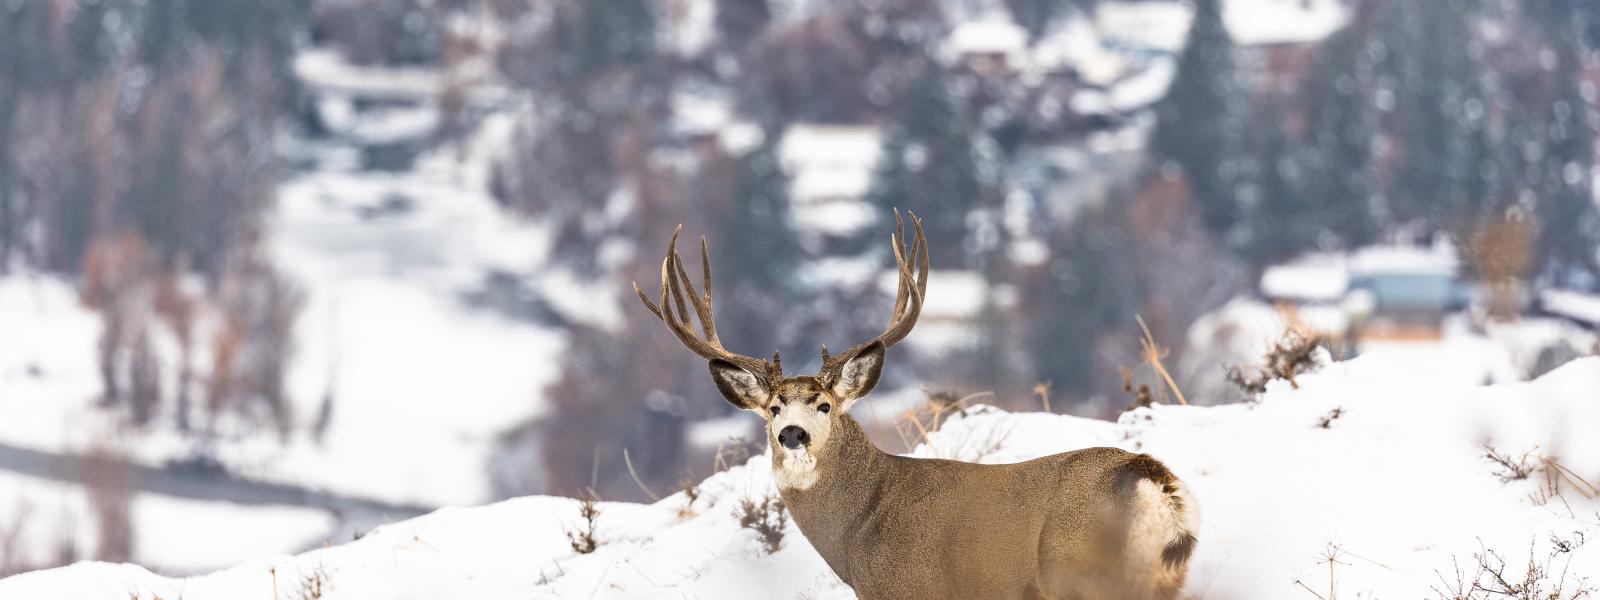 A large mule deer buck standing on a snowy hilltop, looking at the camera